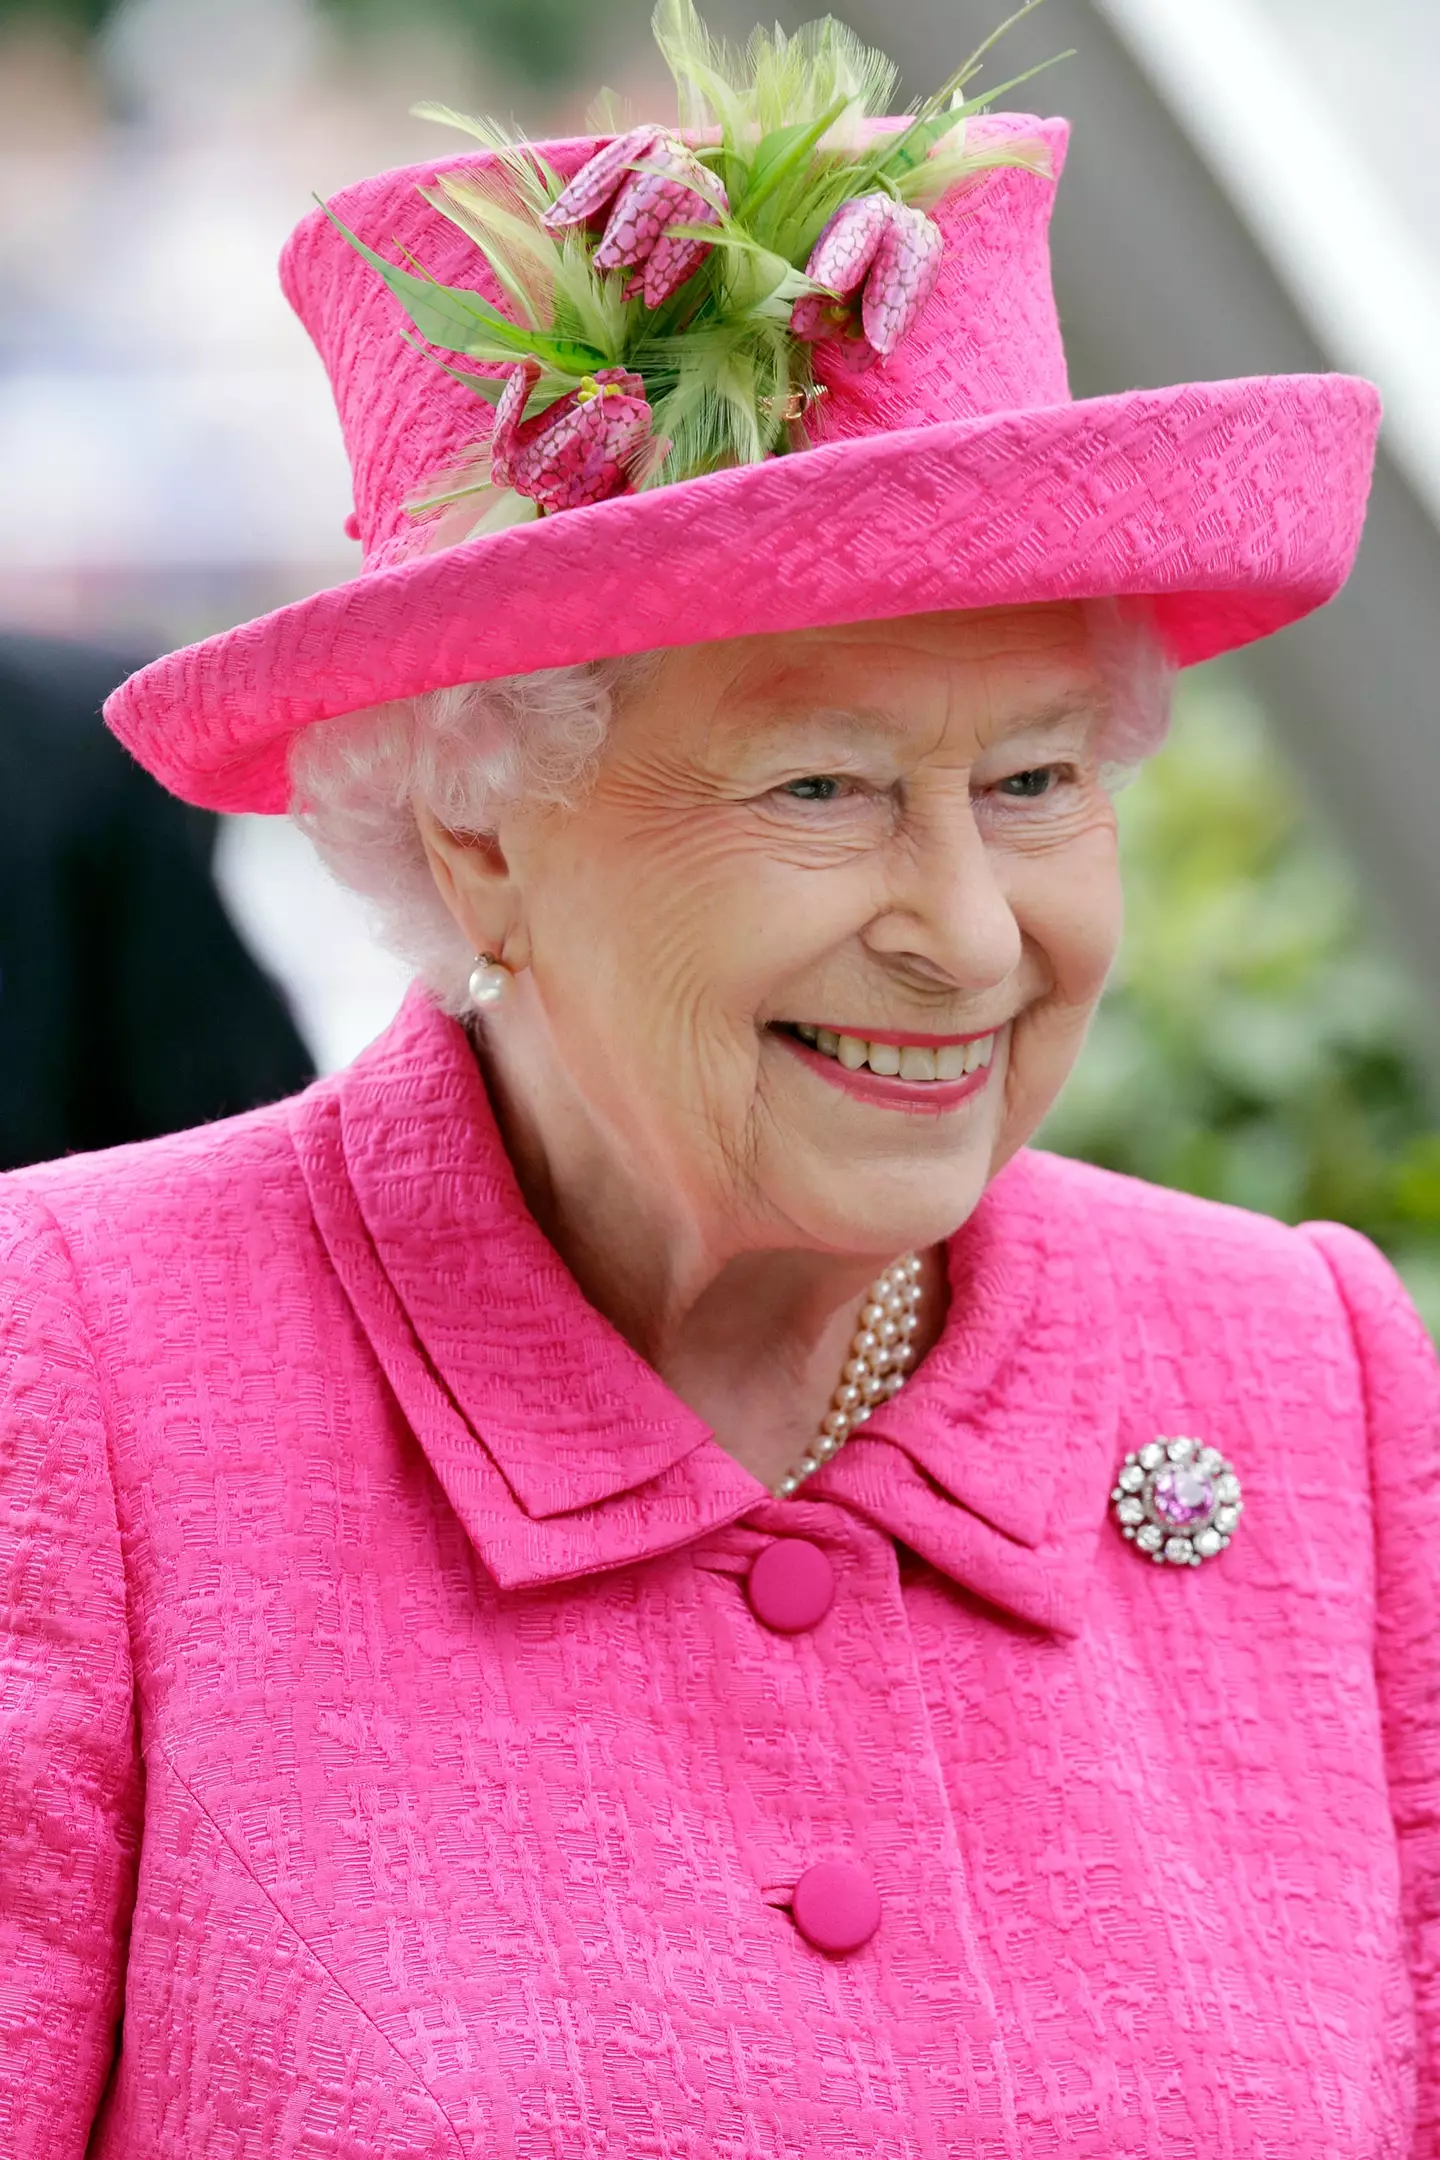 A period of royal mourning will now take place until a week after the Queen's funeral.